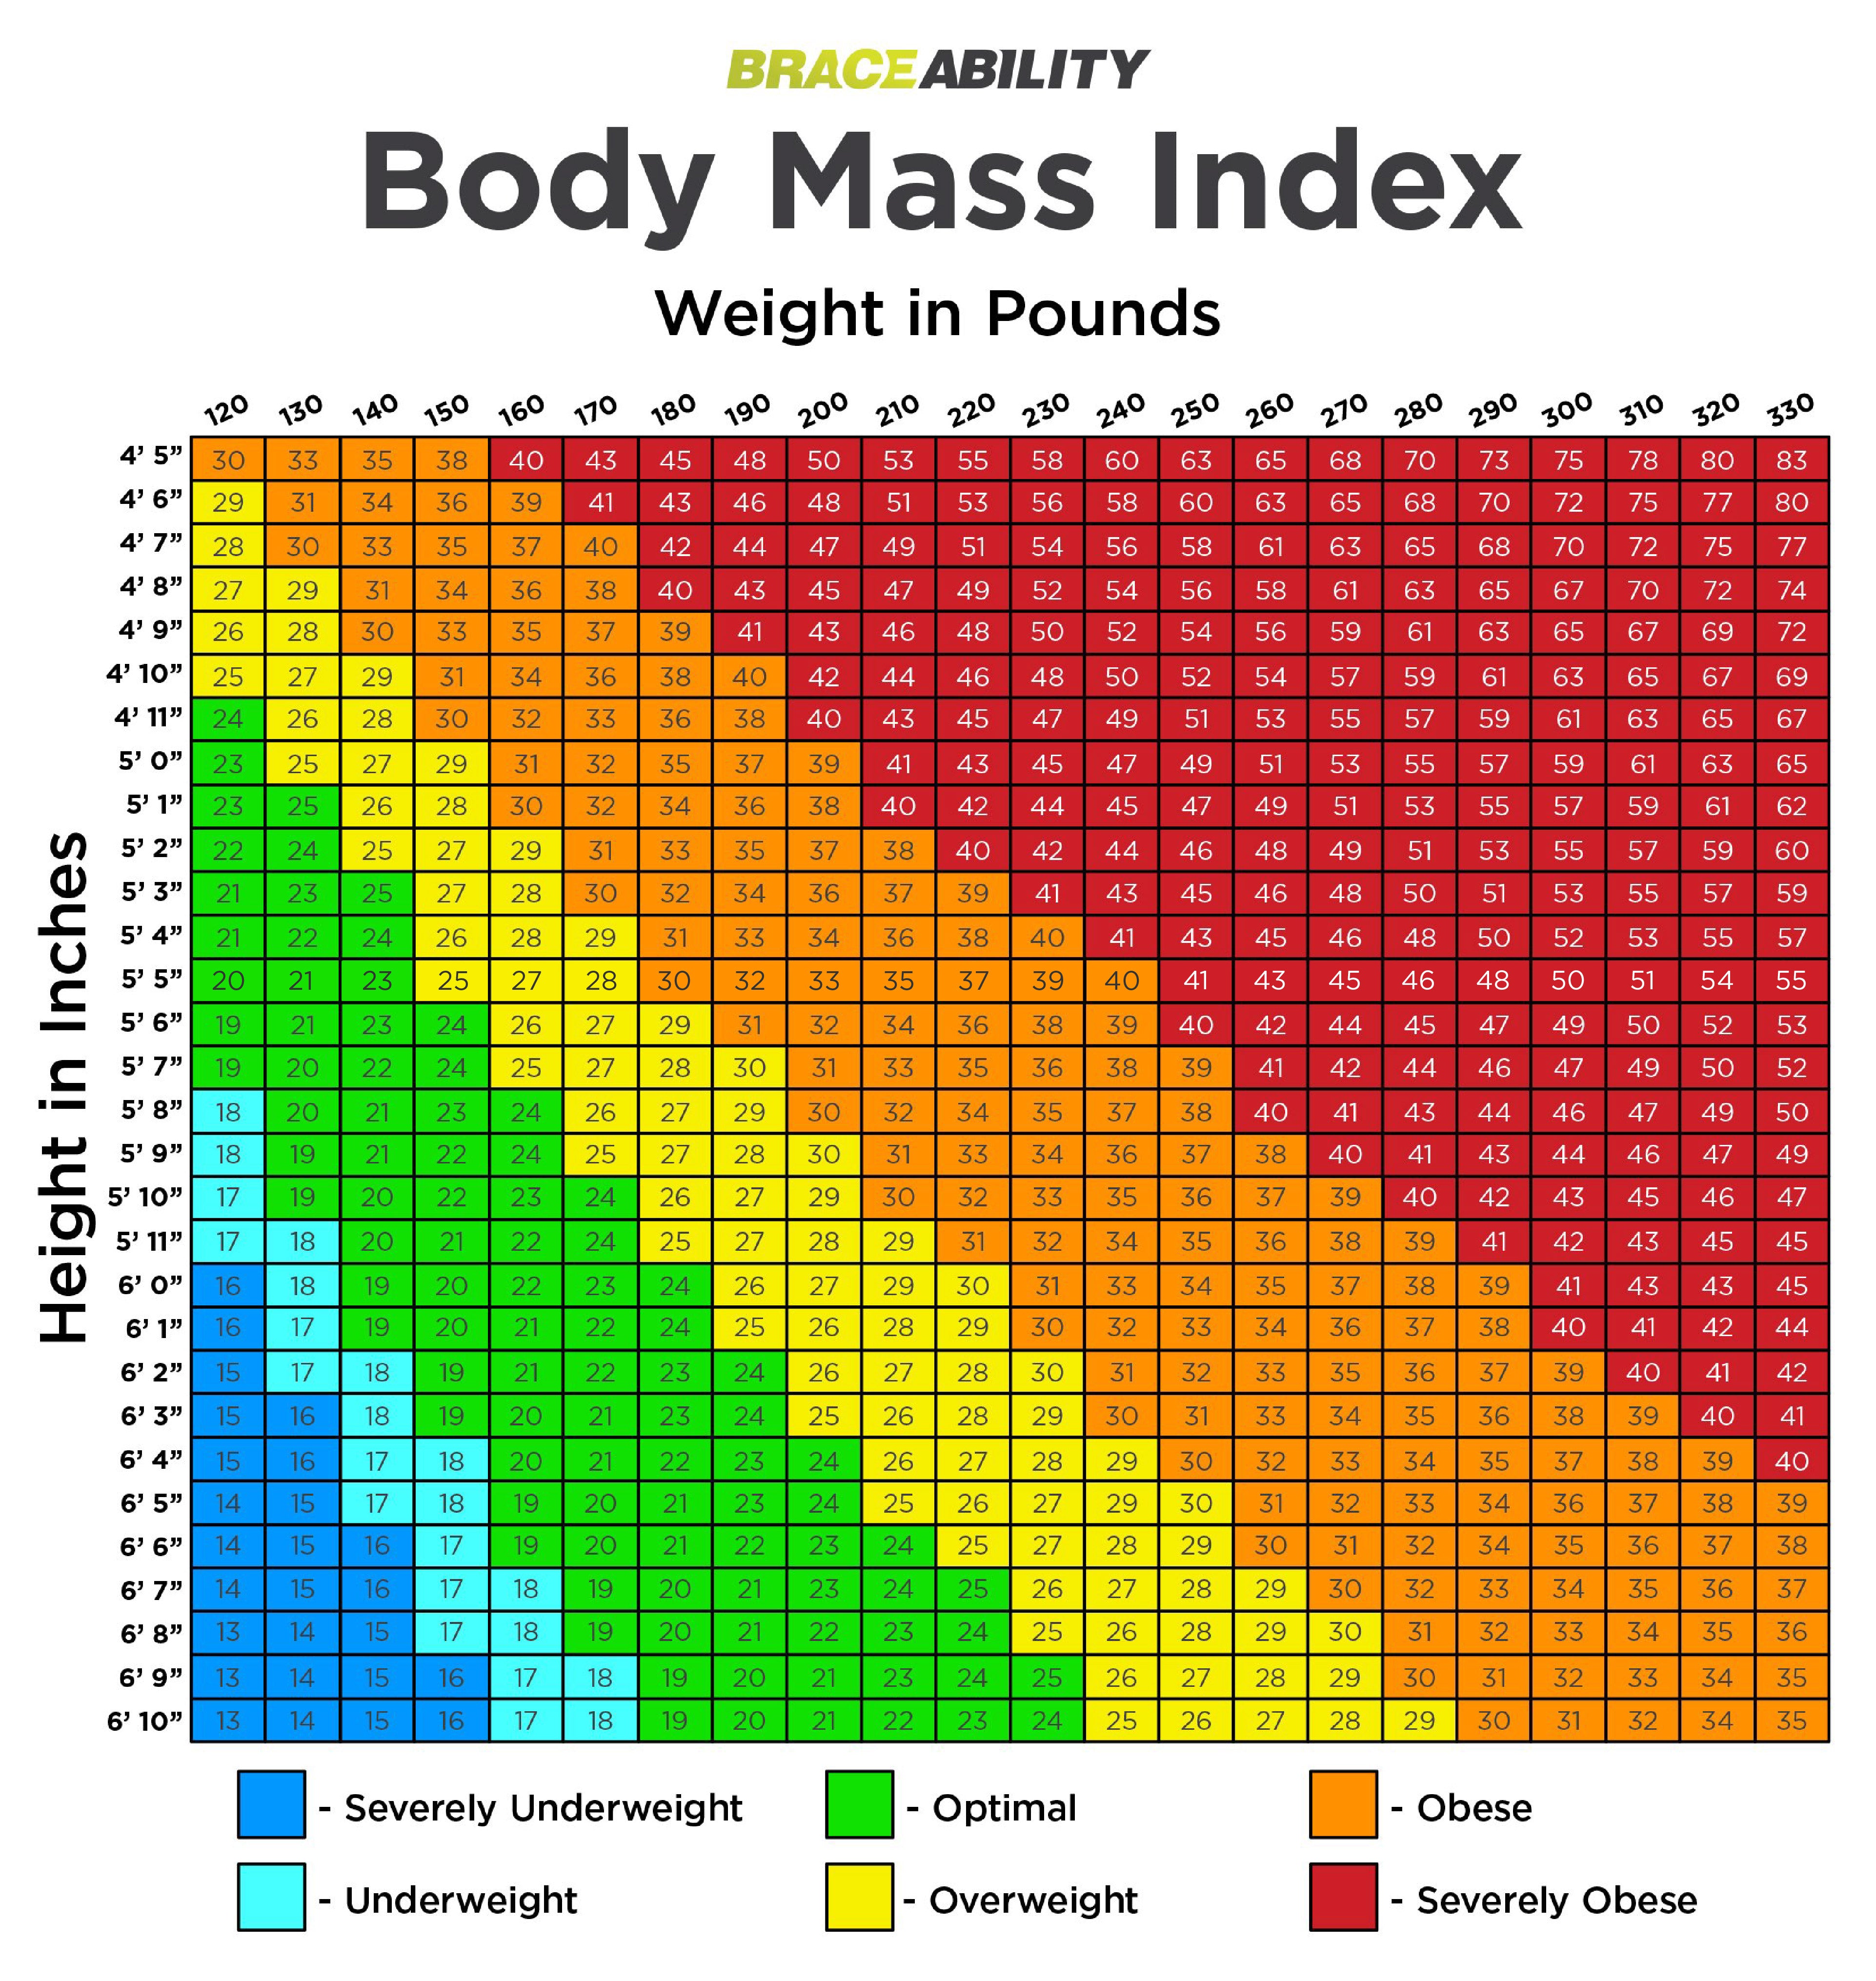 Use this BMI chart to determine how severe your obesity is based on your body mass index